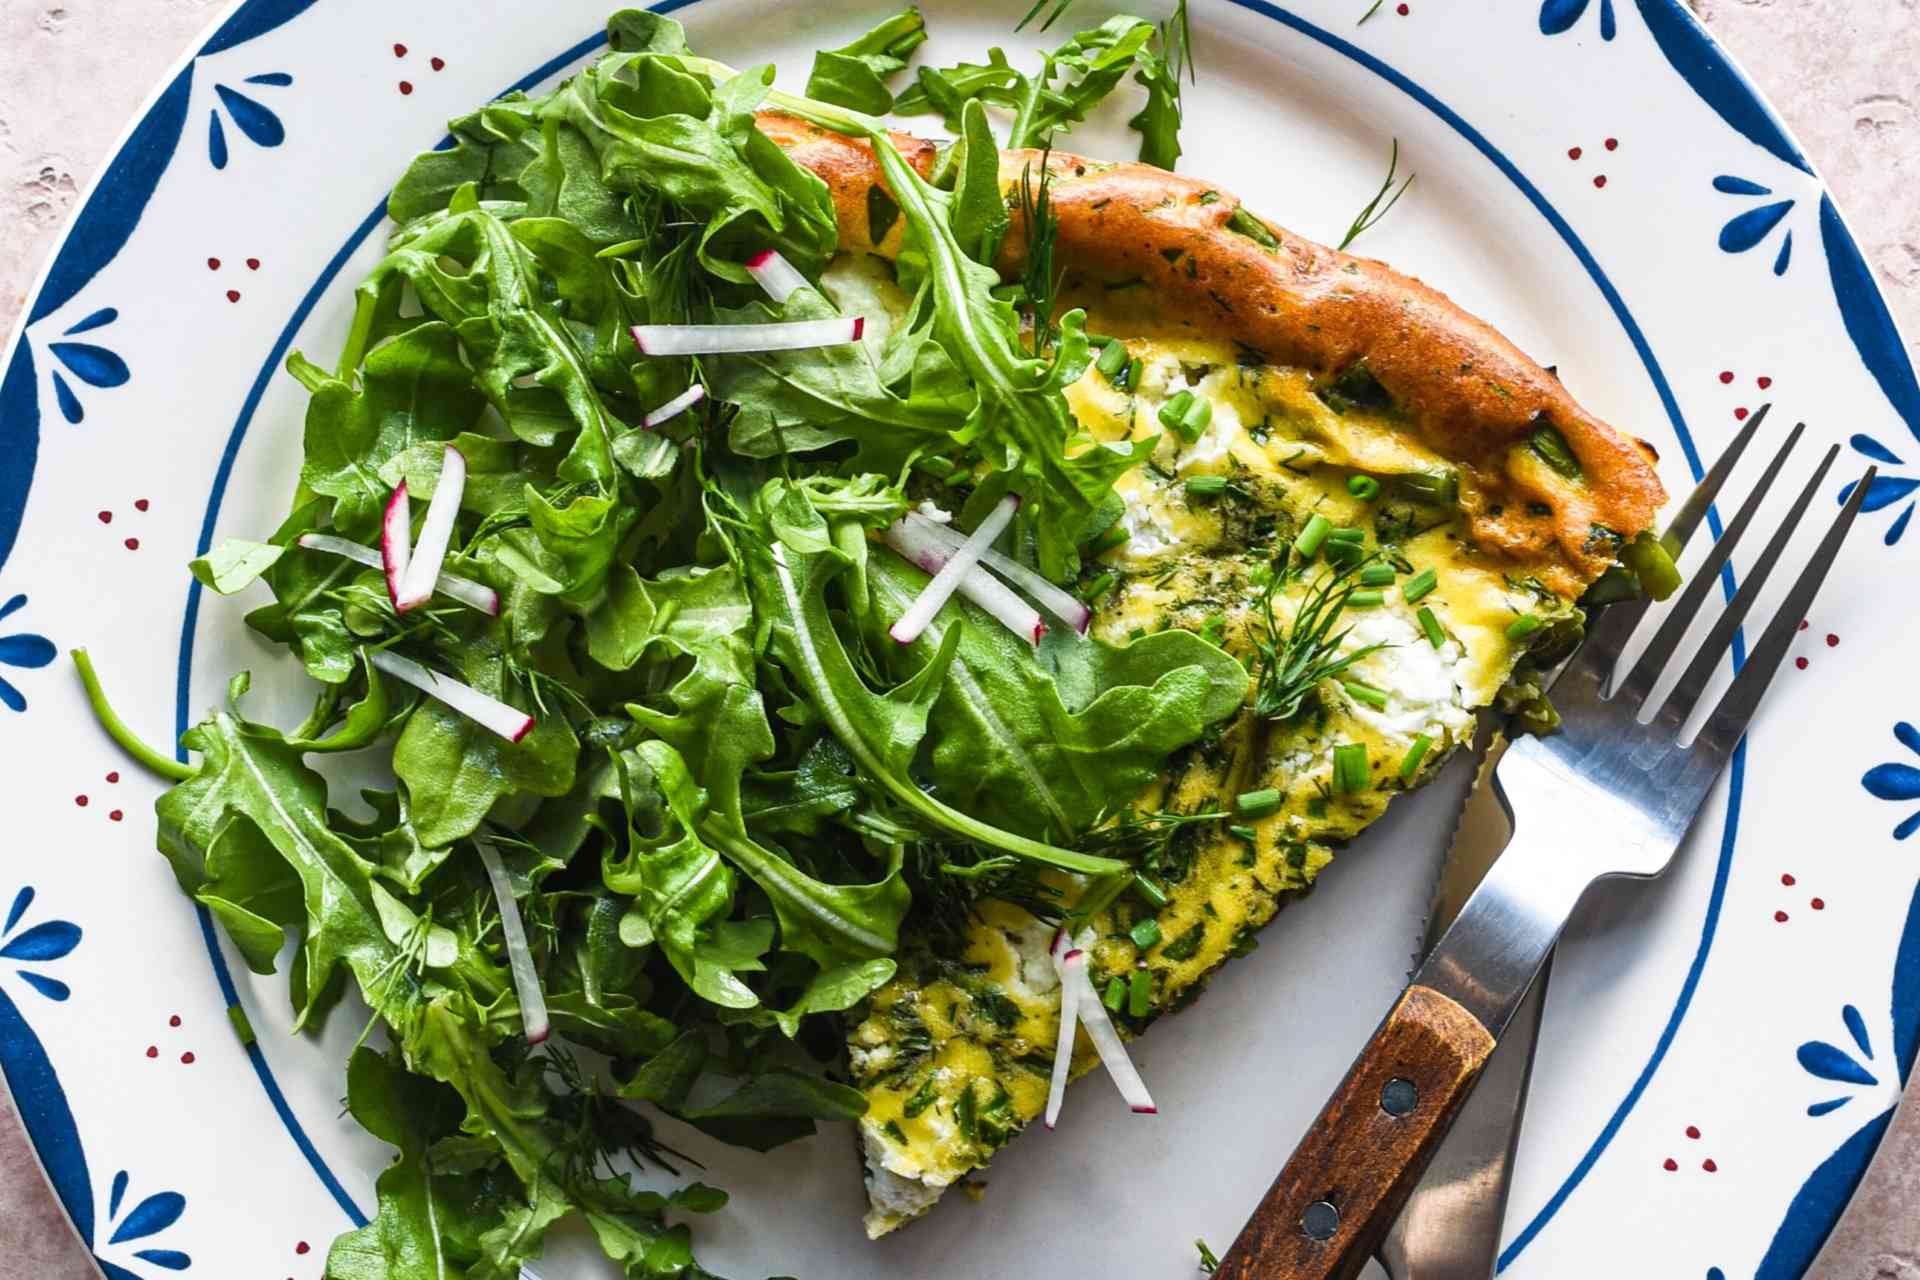 10 Egg Recipes to Start Your Day Sunny Side Up